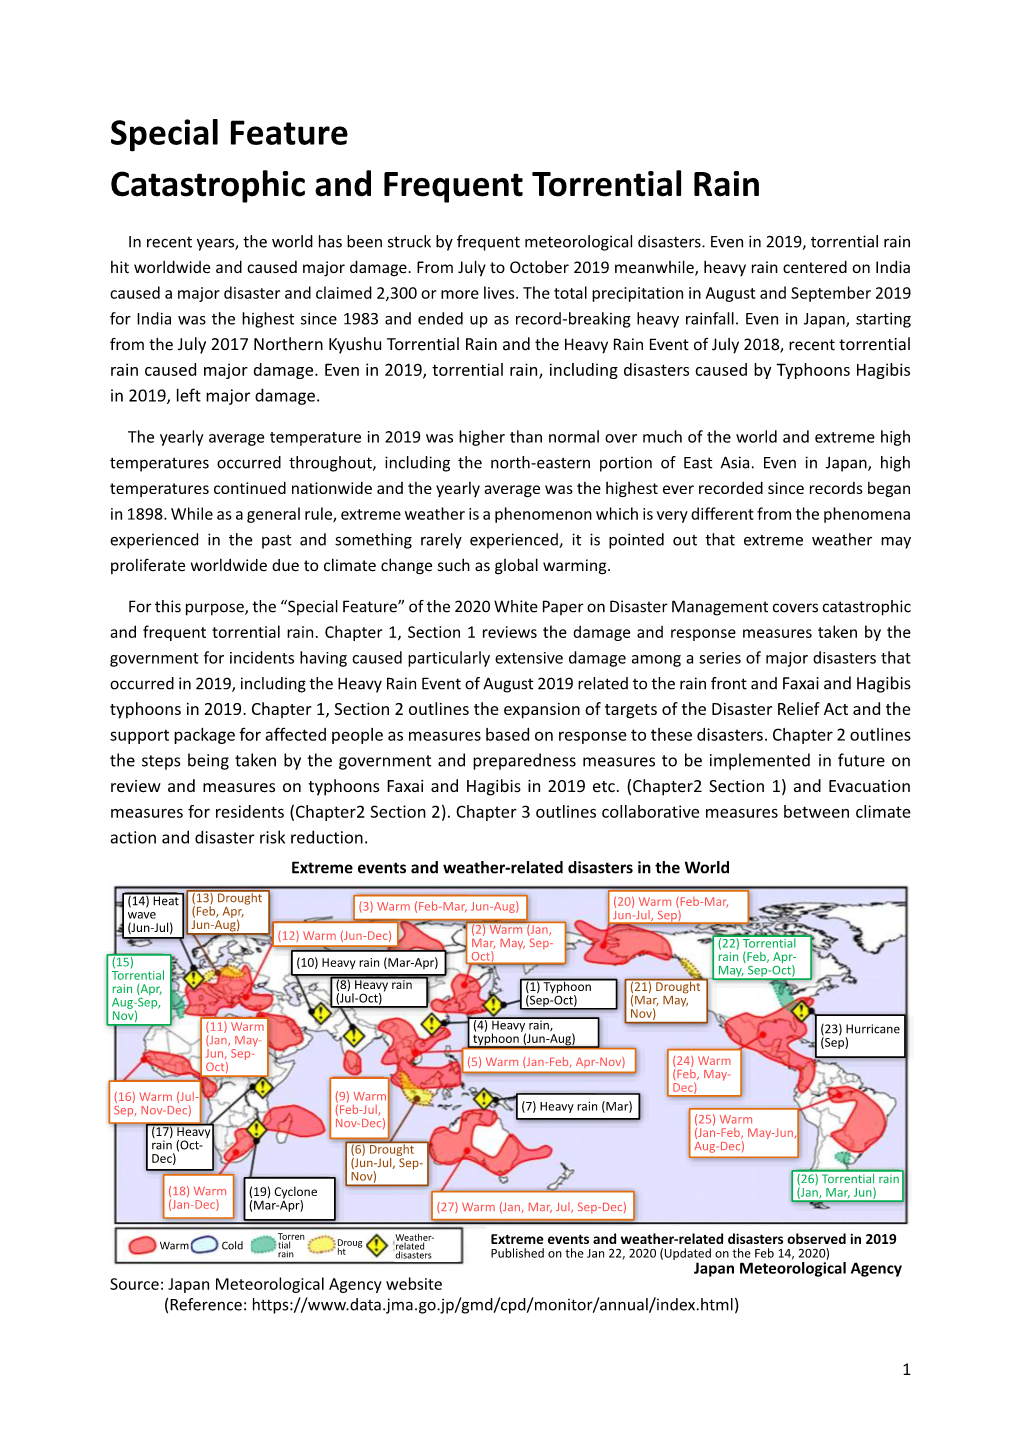 Section 1 Major Disasters Occurred in 2019 (PDF:1.7MB)